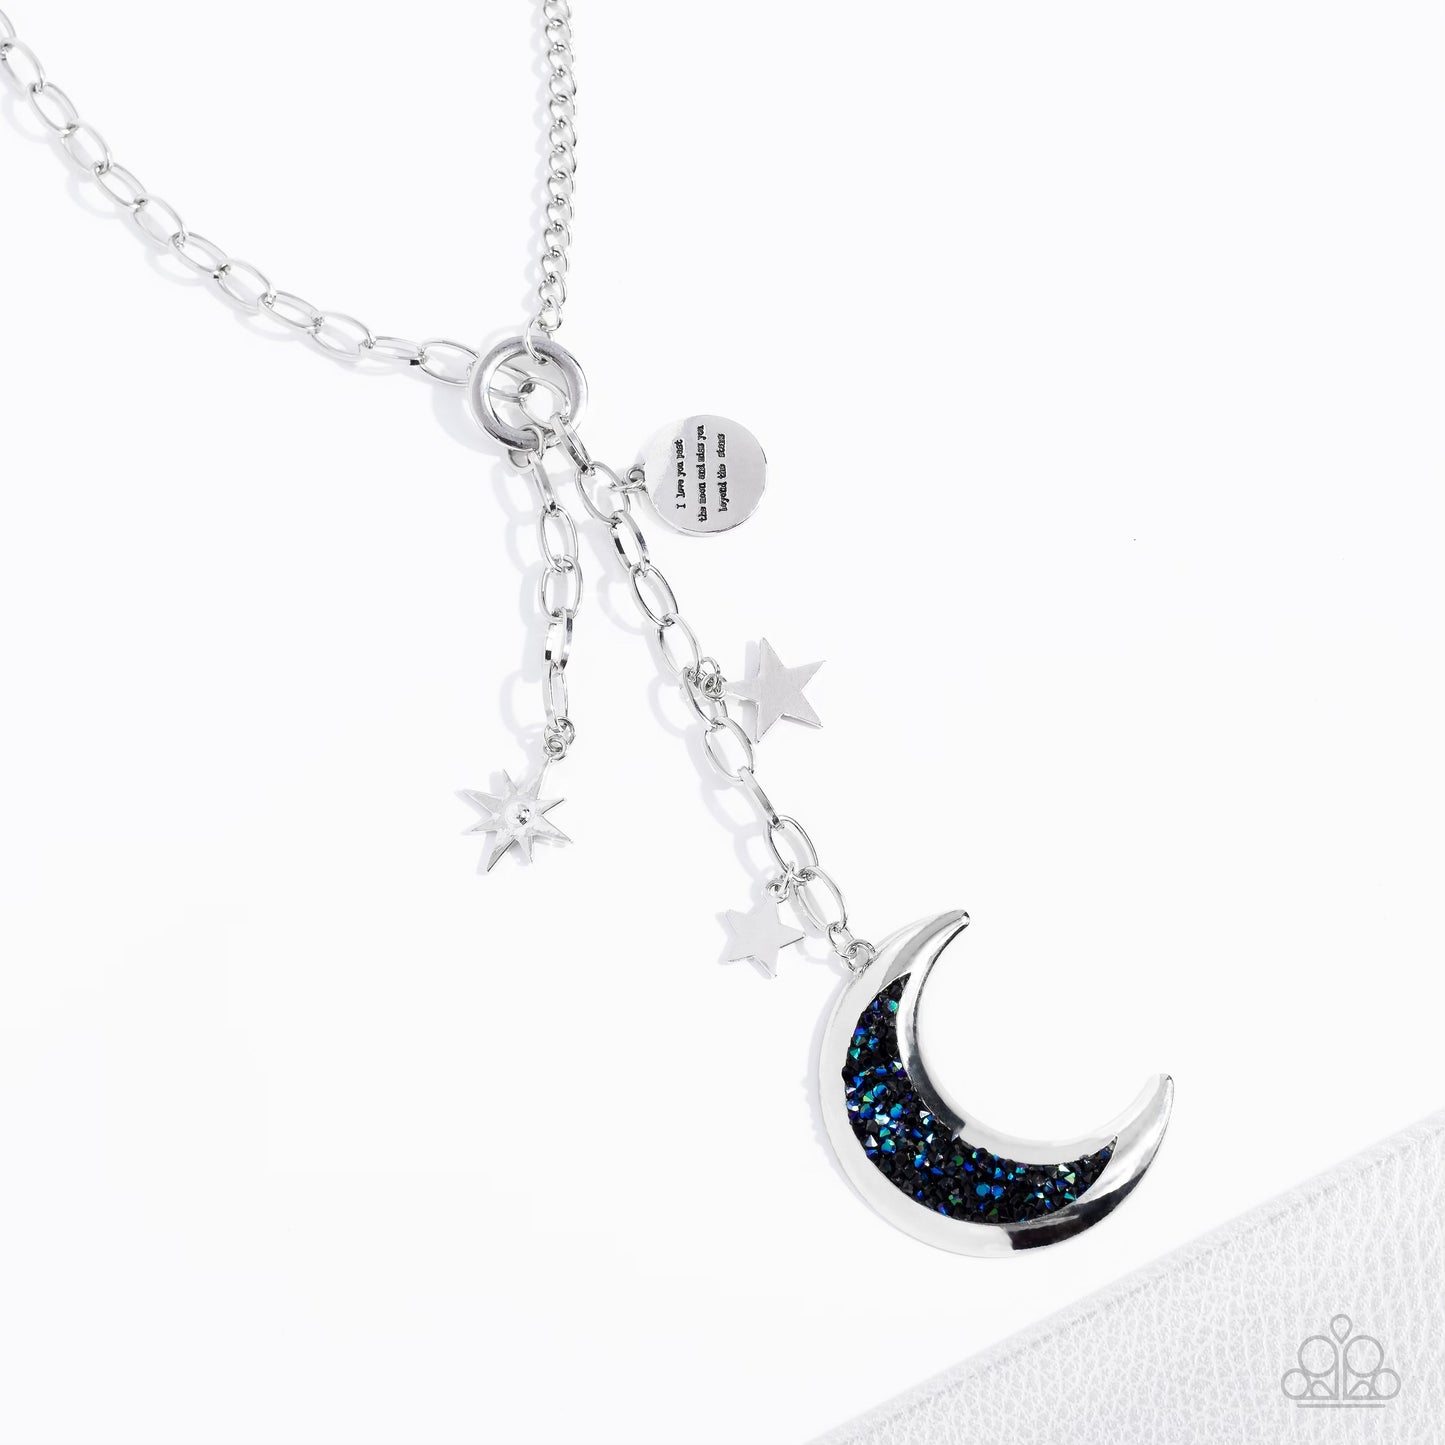 Paparazzi Necklace - Once in a Blue Moon Necklace Set - Silver Necklace  Paparazzi Jewelry images